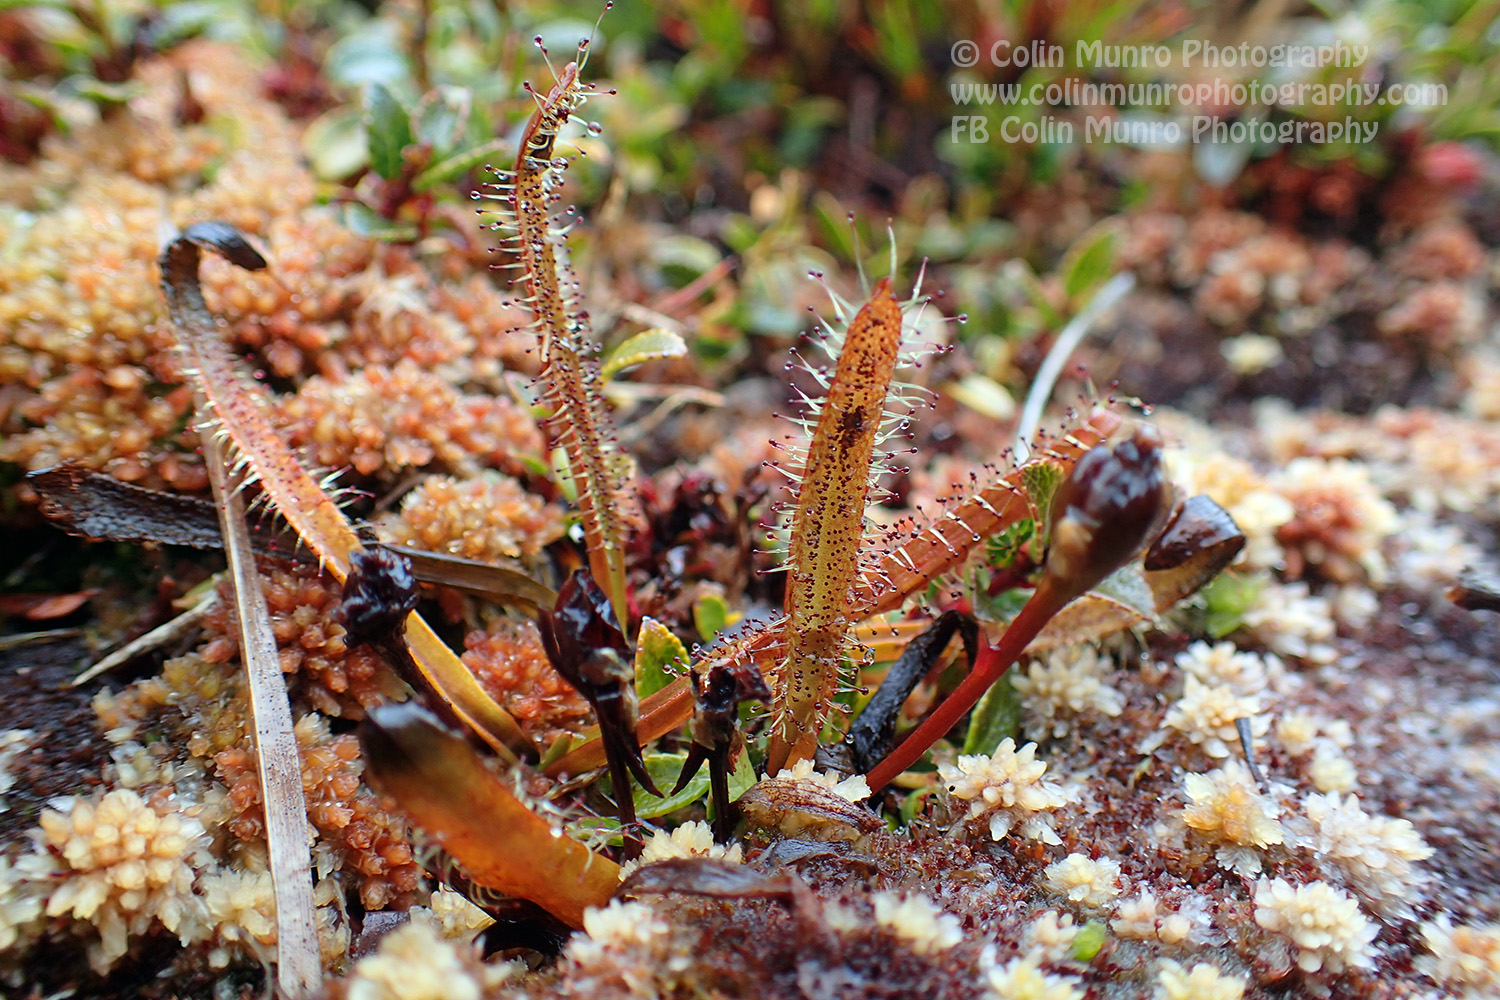 The carnivorous plant Alpine sundew Drosera arcturi) is common in boggy areas.  It is found throughout the alpine and sub-alpine zones. Rees Dart Track,. Copyright Colin Munro Photography